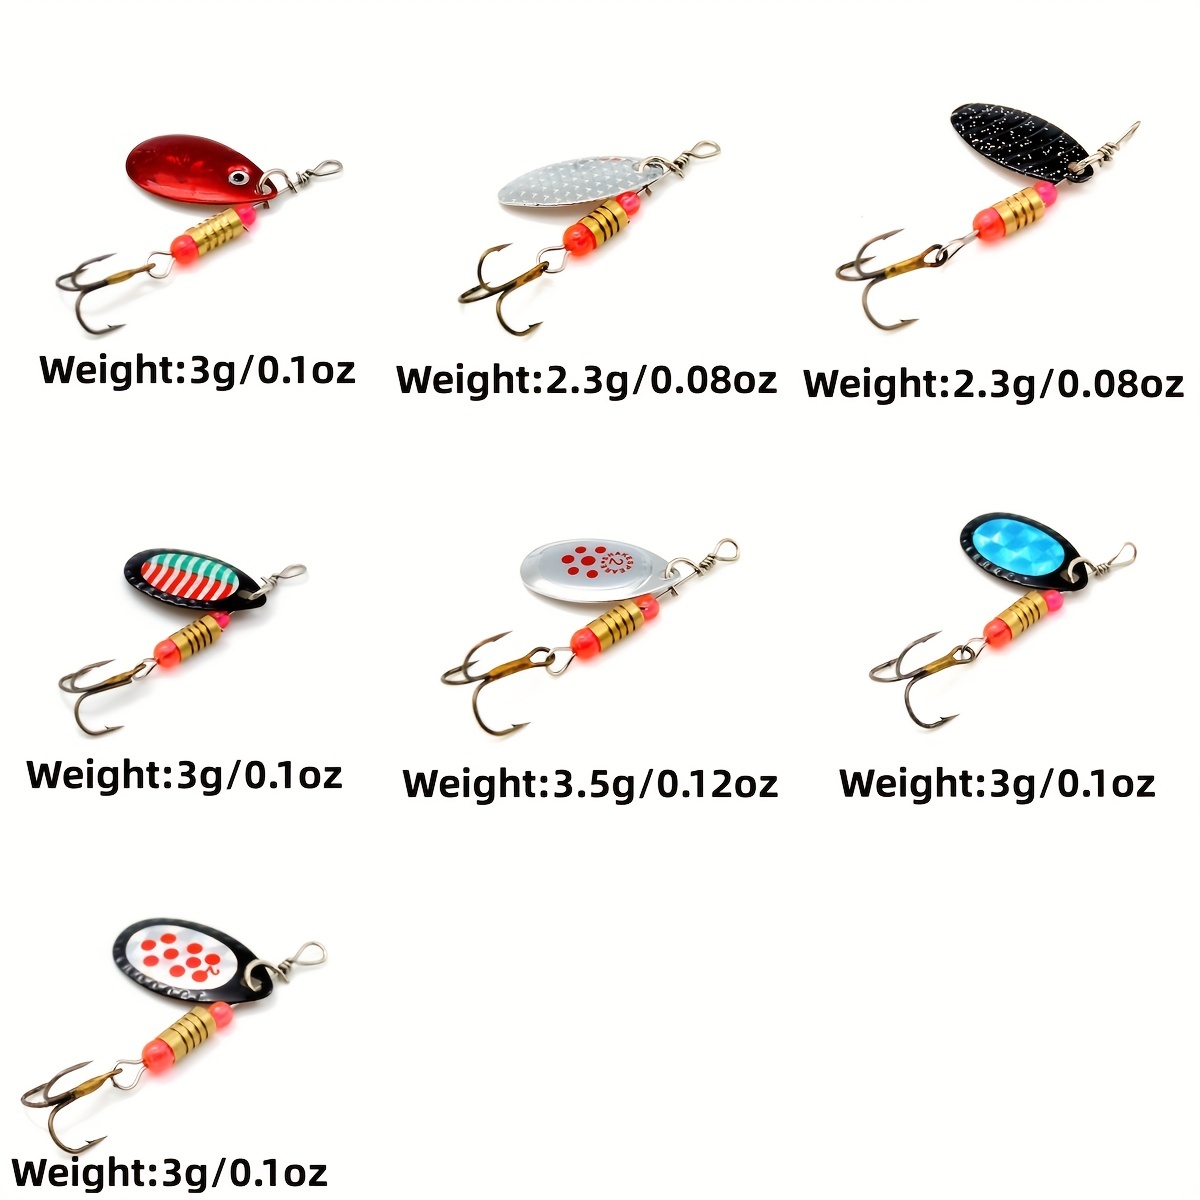 Spinnerbait Fishing Lure, Hard Metal Jig Spinner Baits Kits Swimbait for  Bass Trout Pike Salmon Walleye Freshwater Saltwater 5pcs/Pack